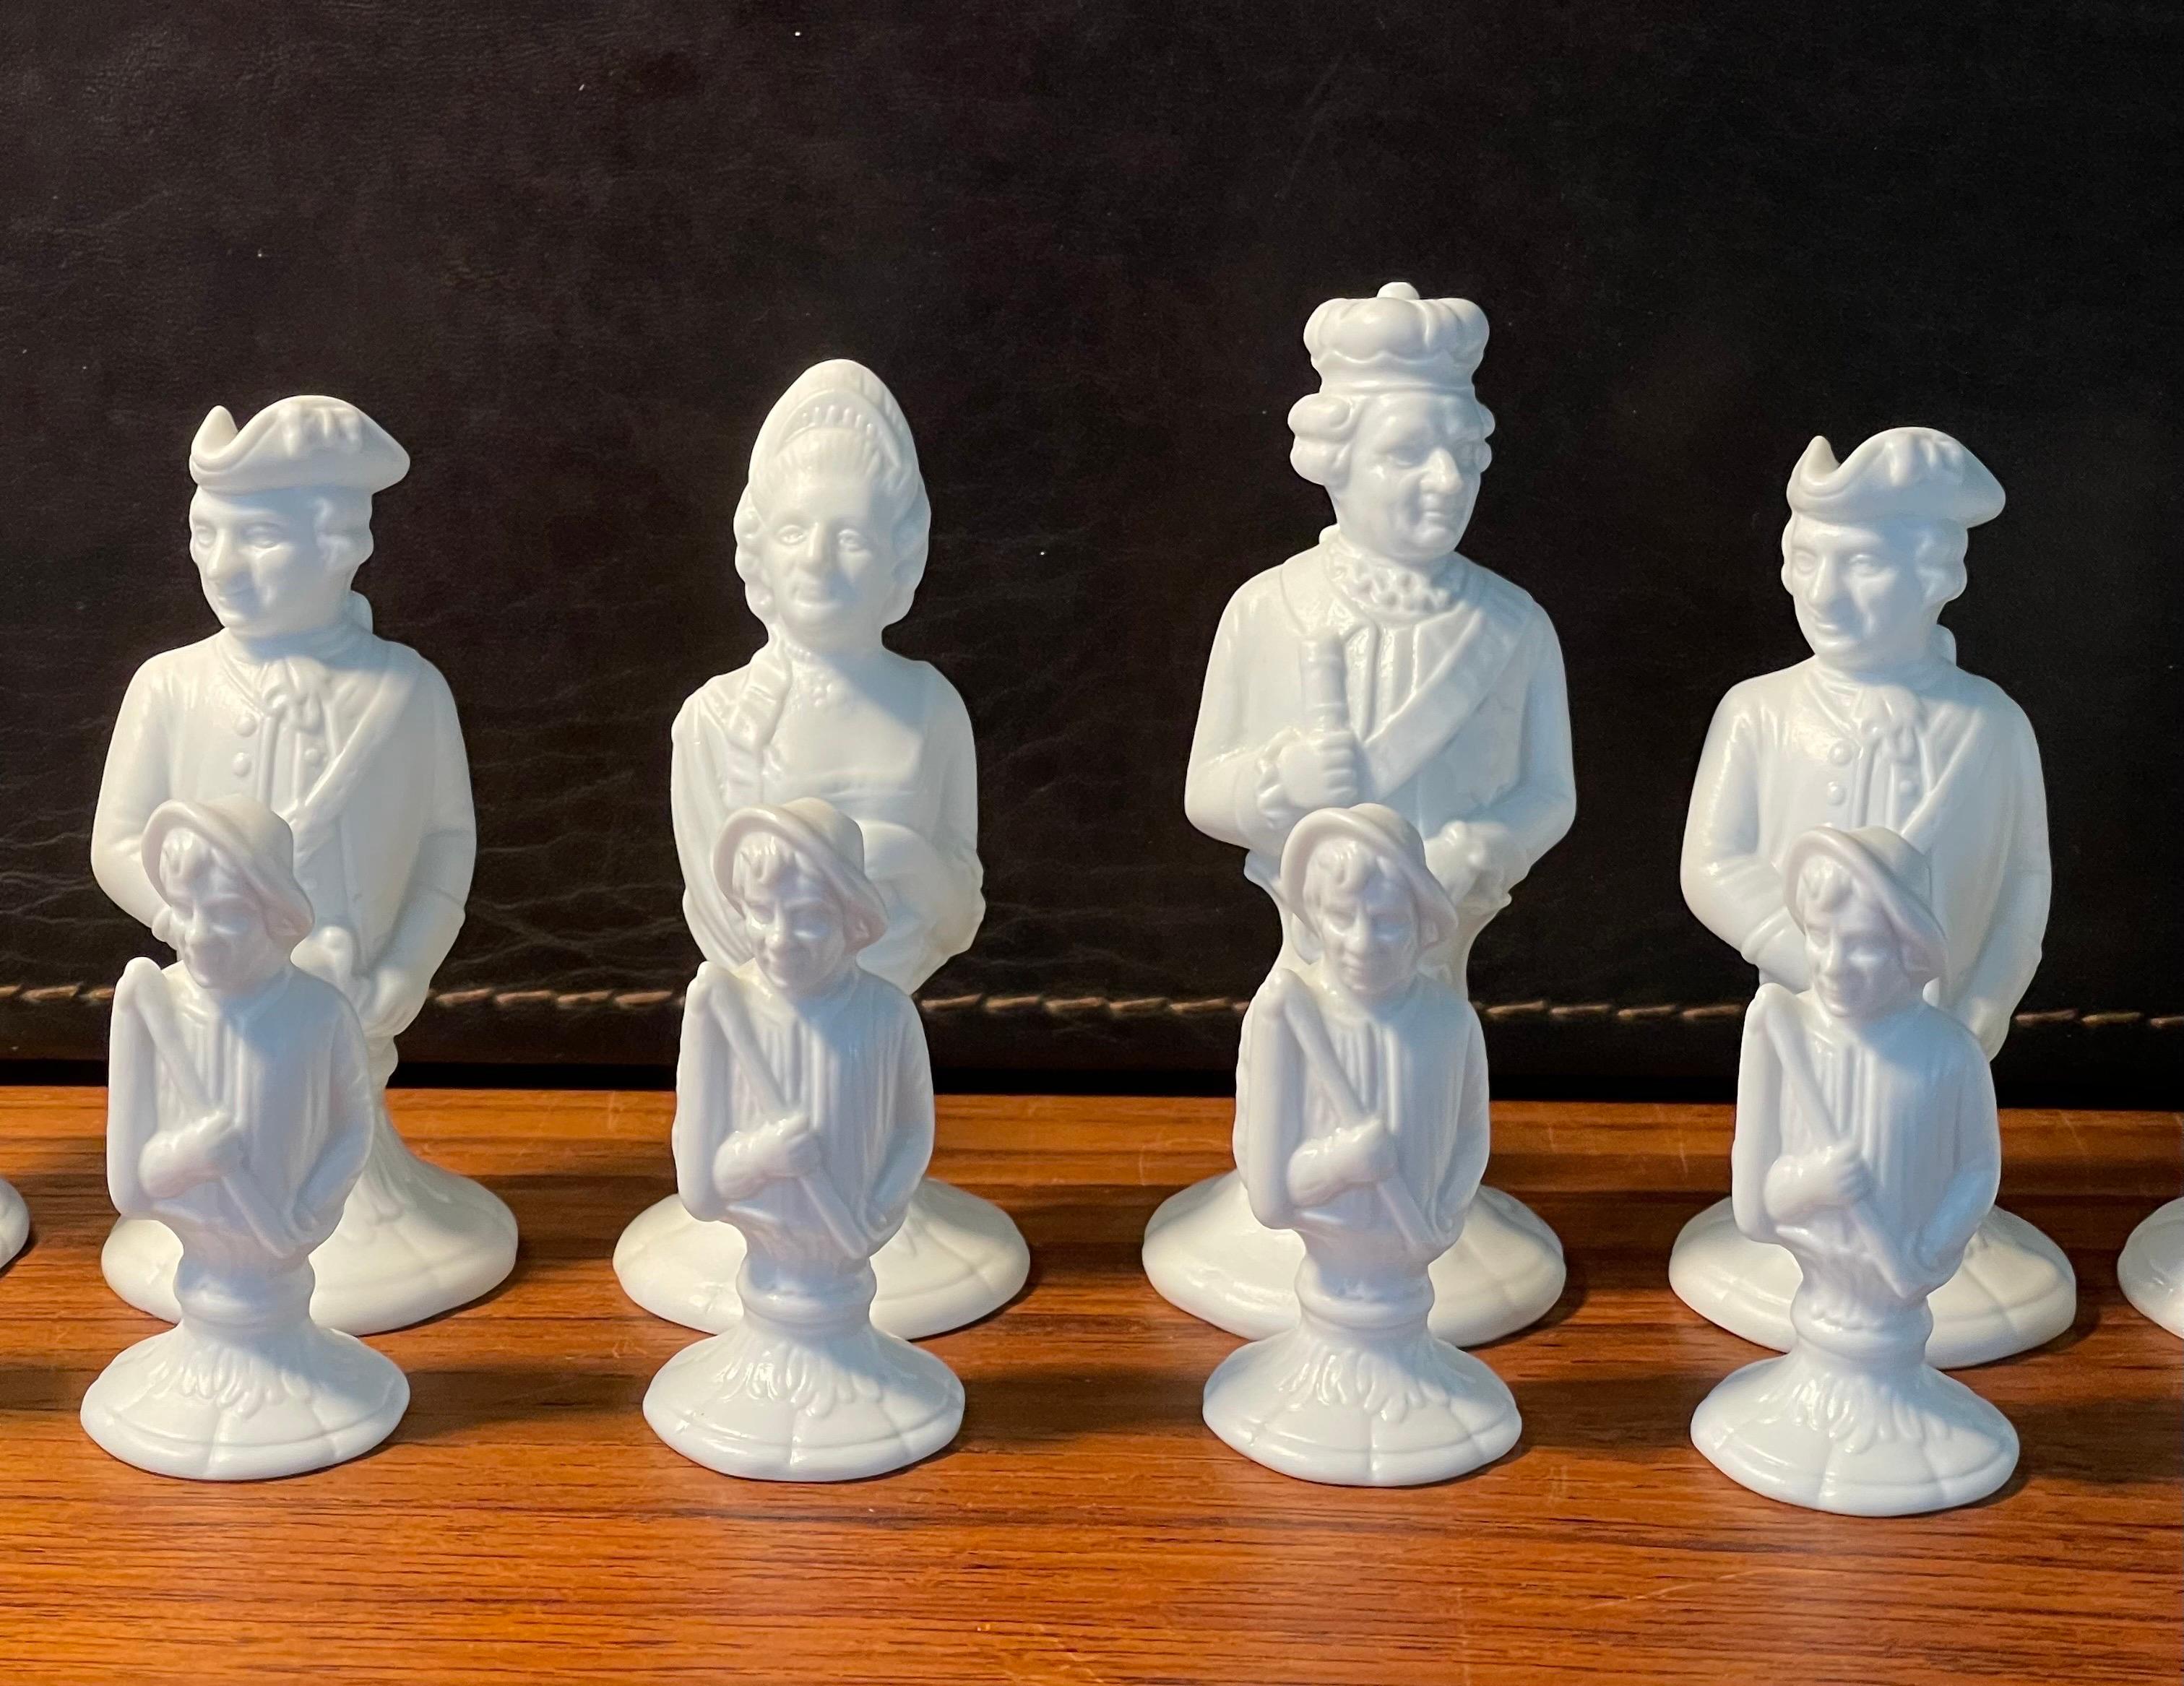 Vintage Bisque Porcelain Chess Set with Etched Glass Board by Furstenberg  For Sale 2